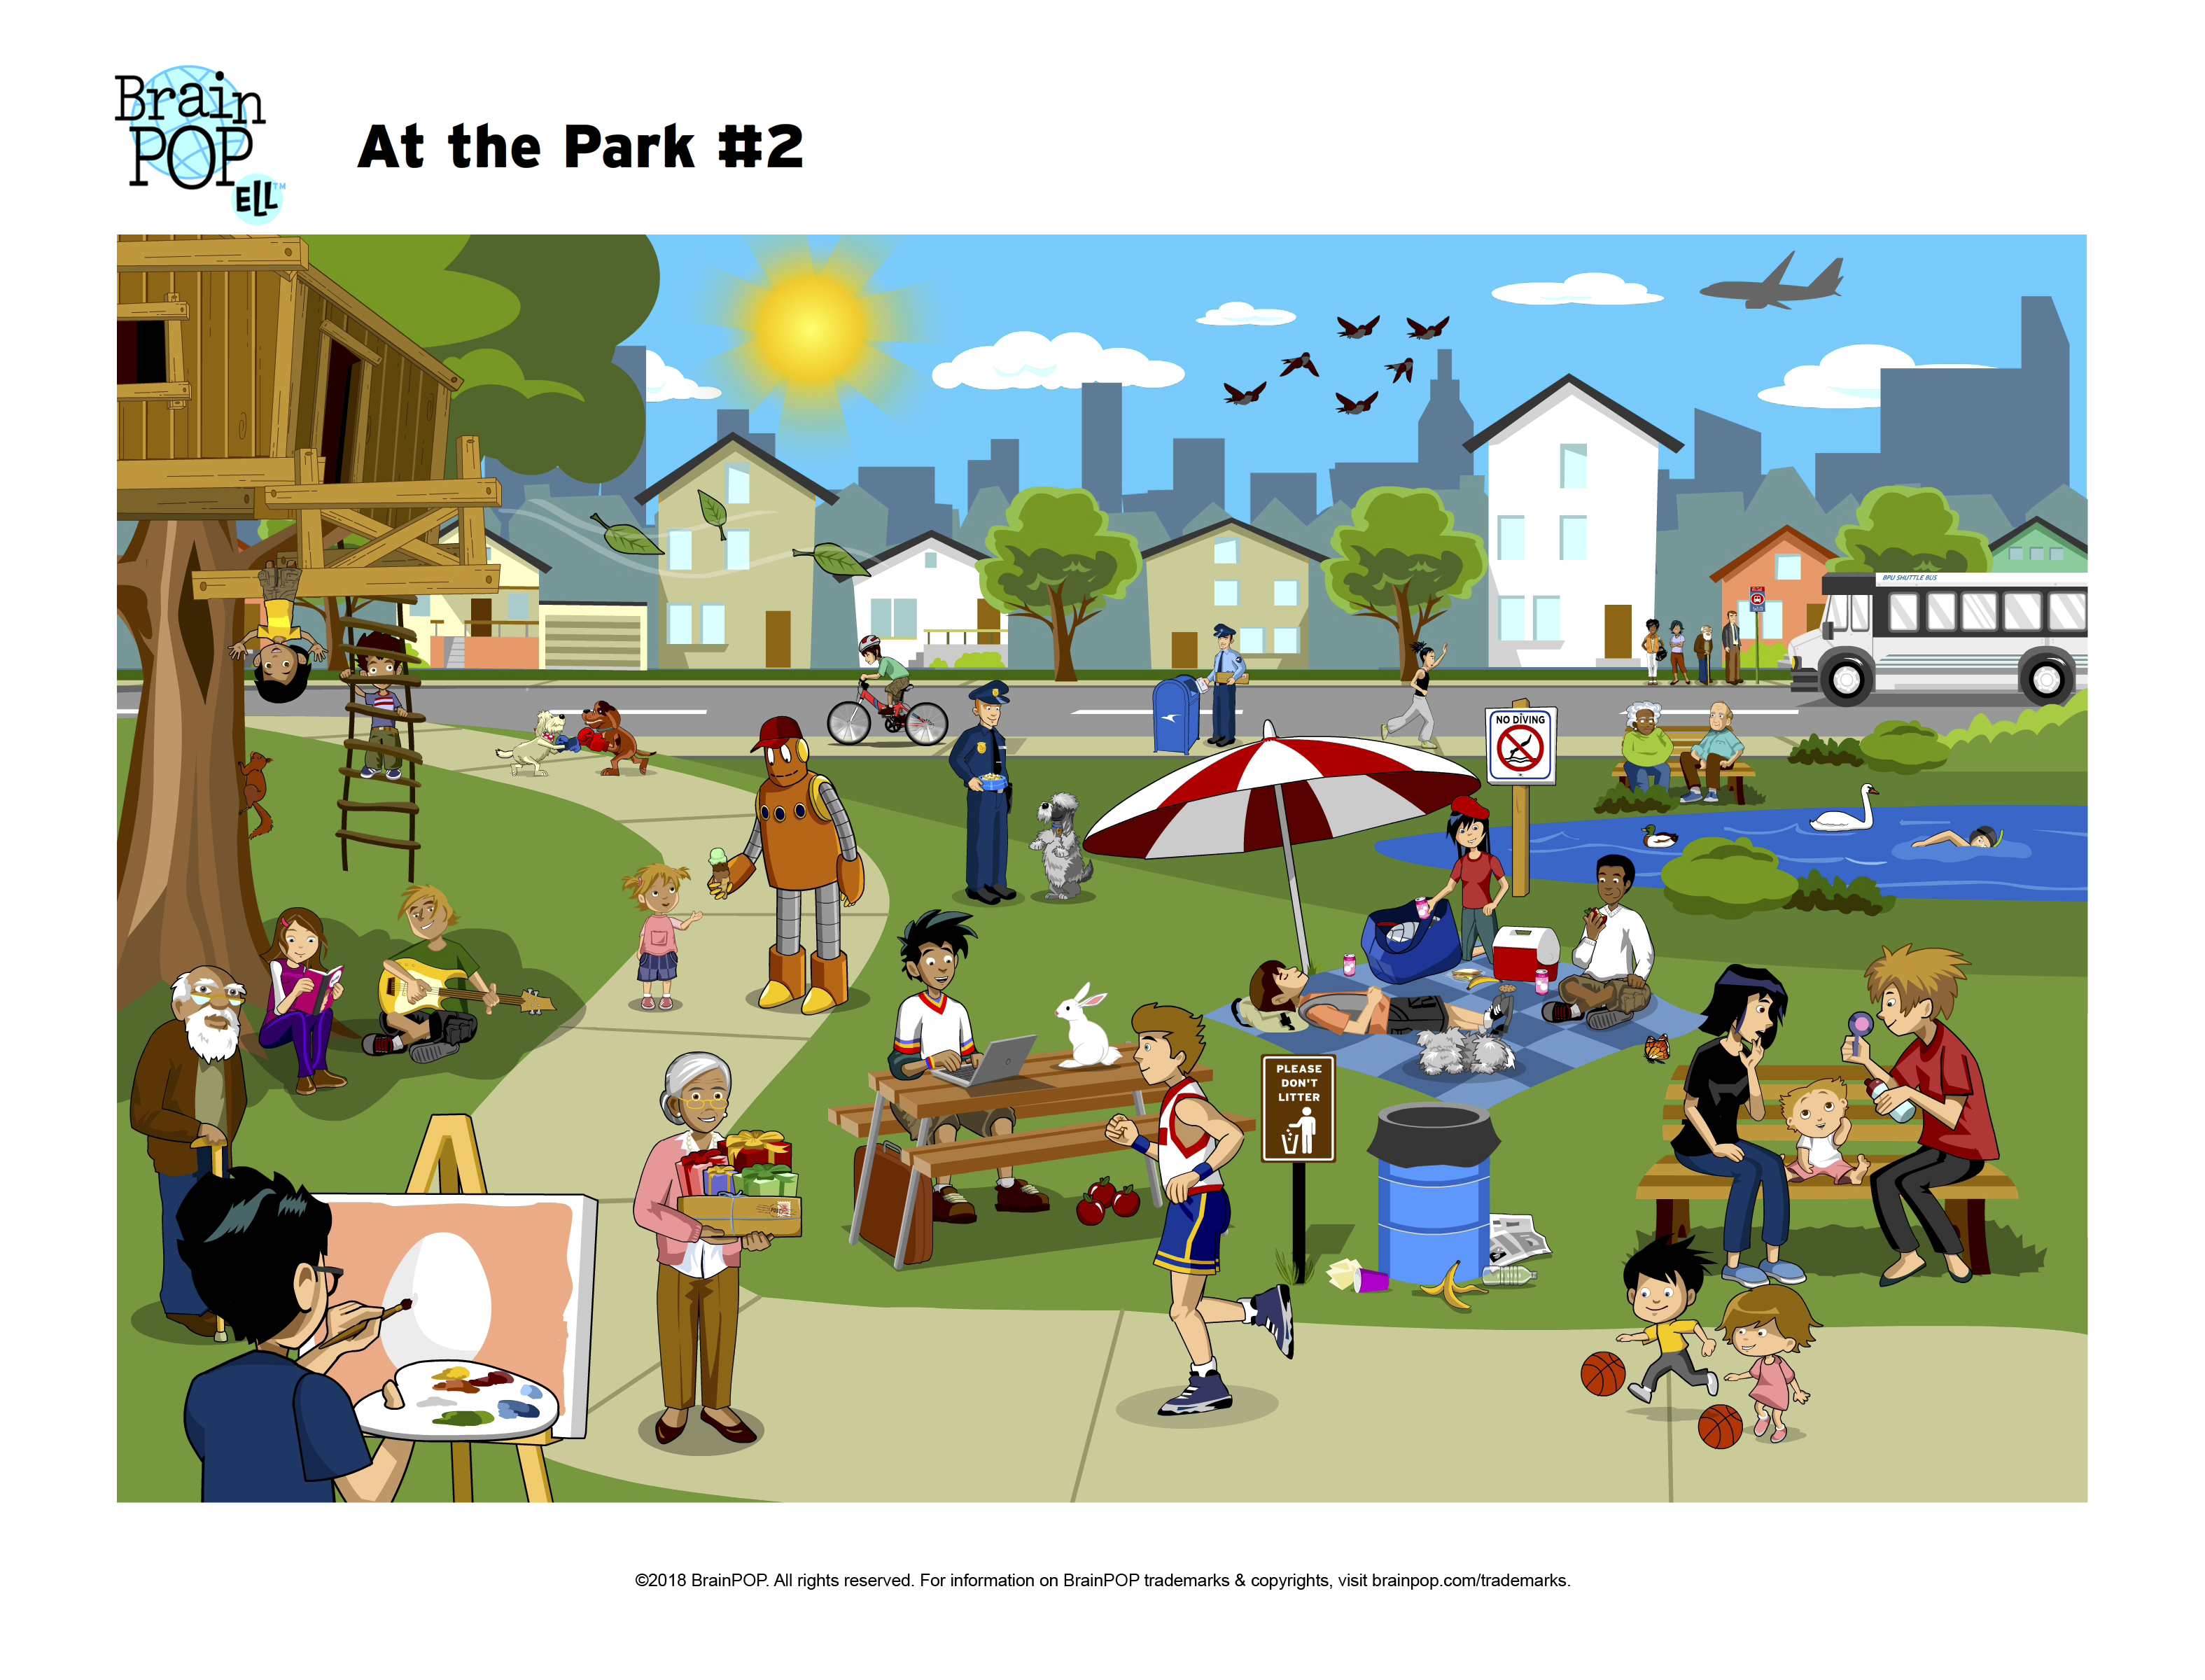 At the Park Action Image: Find the Differences